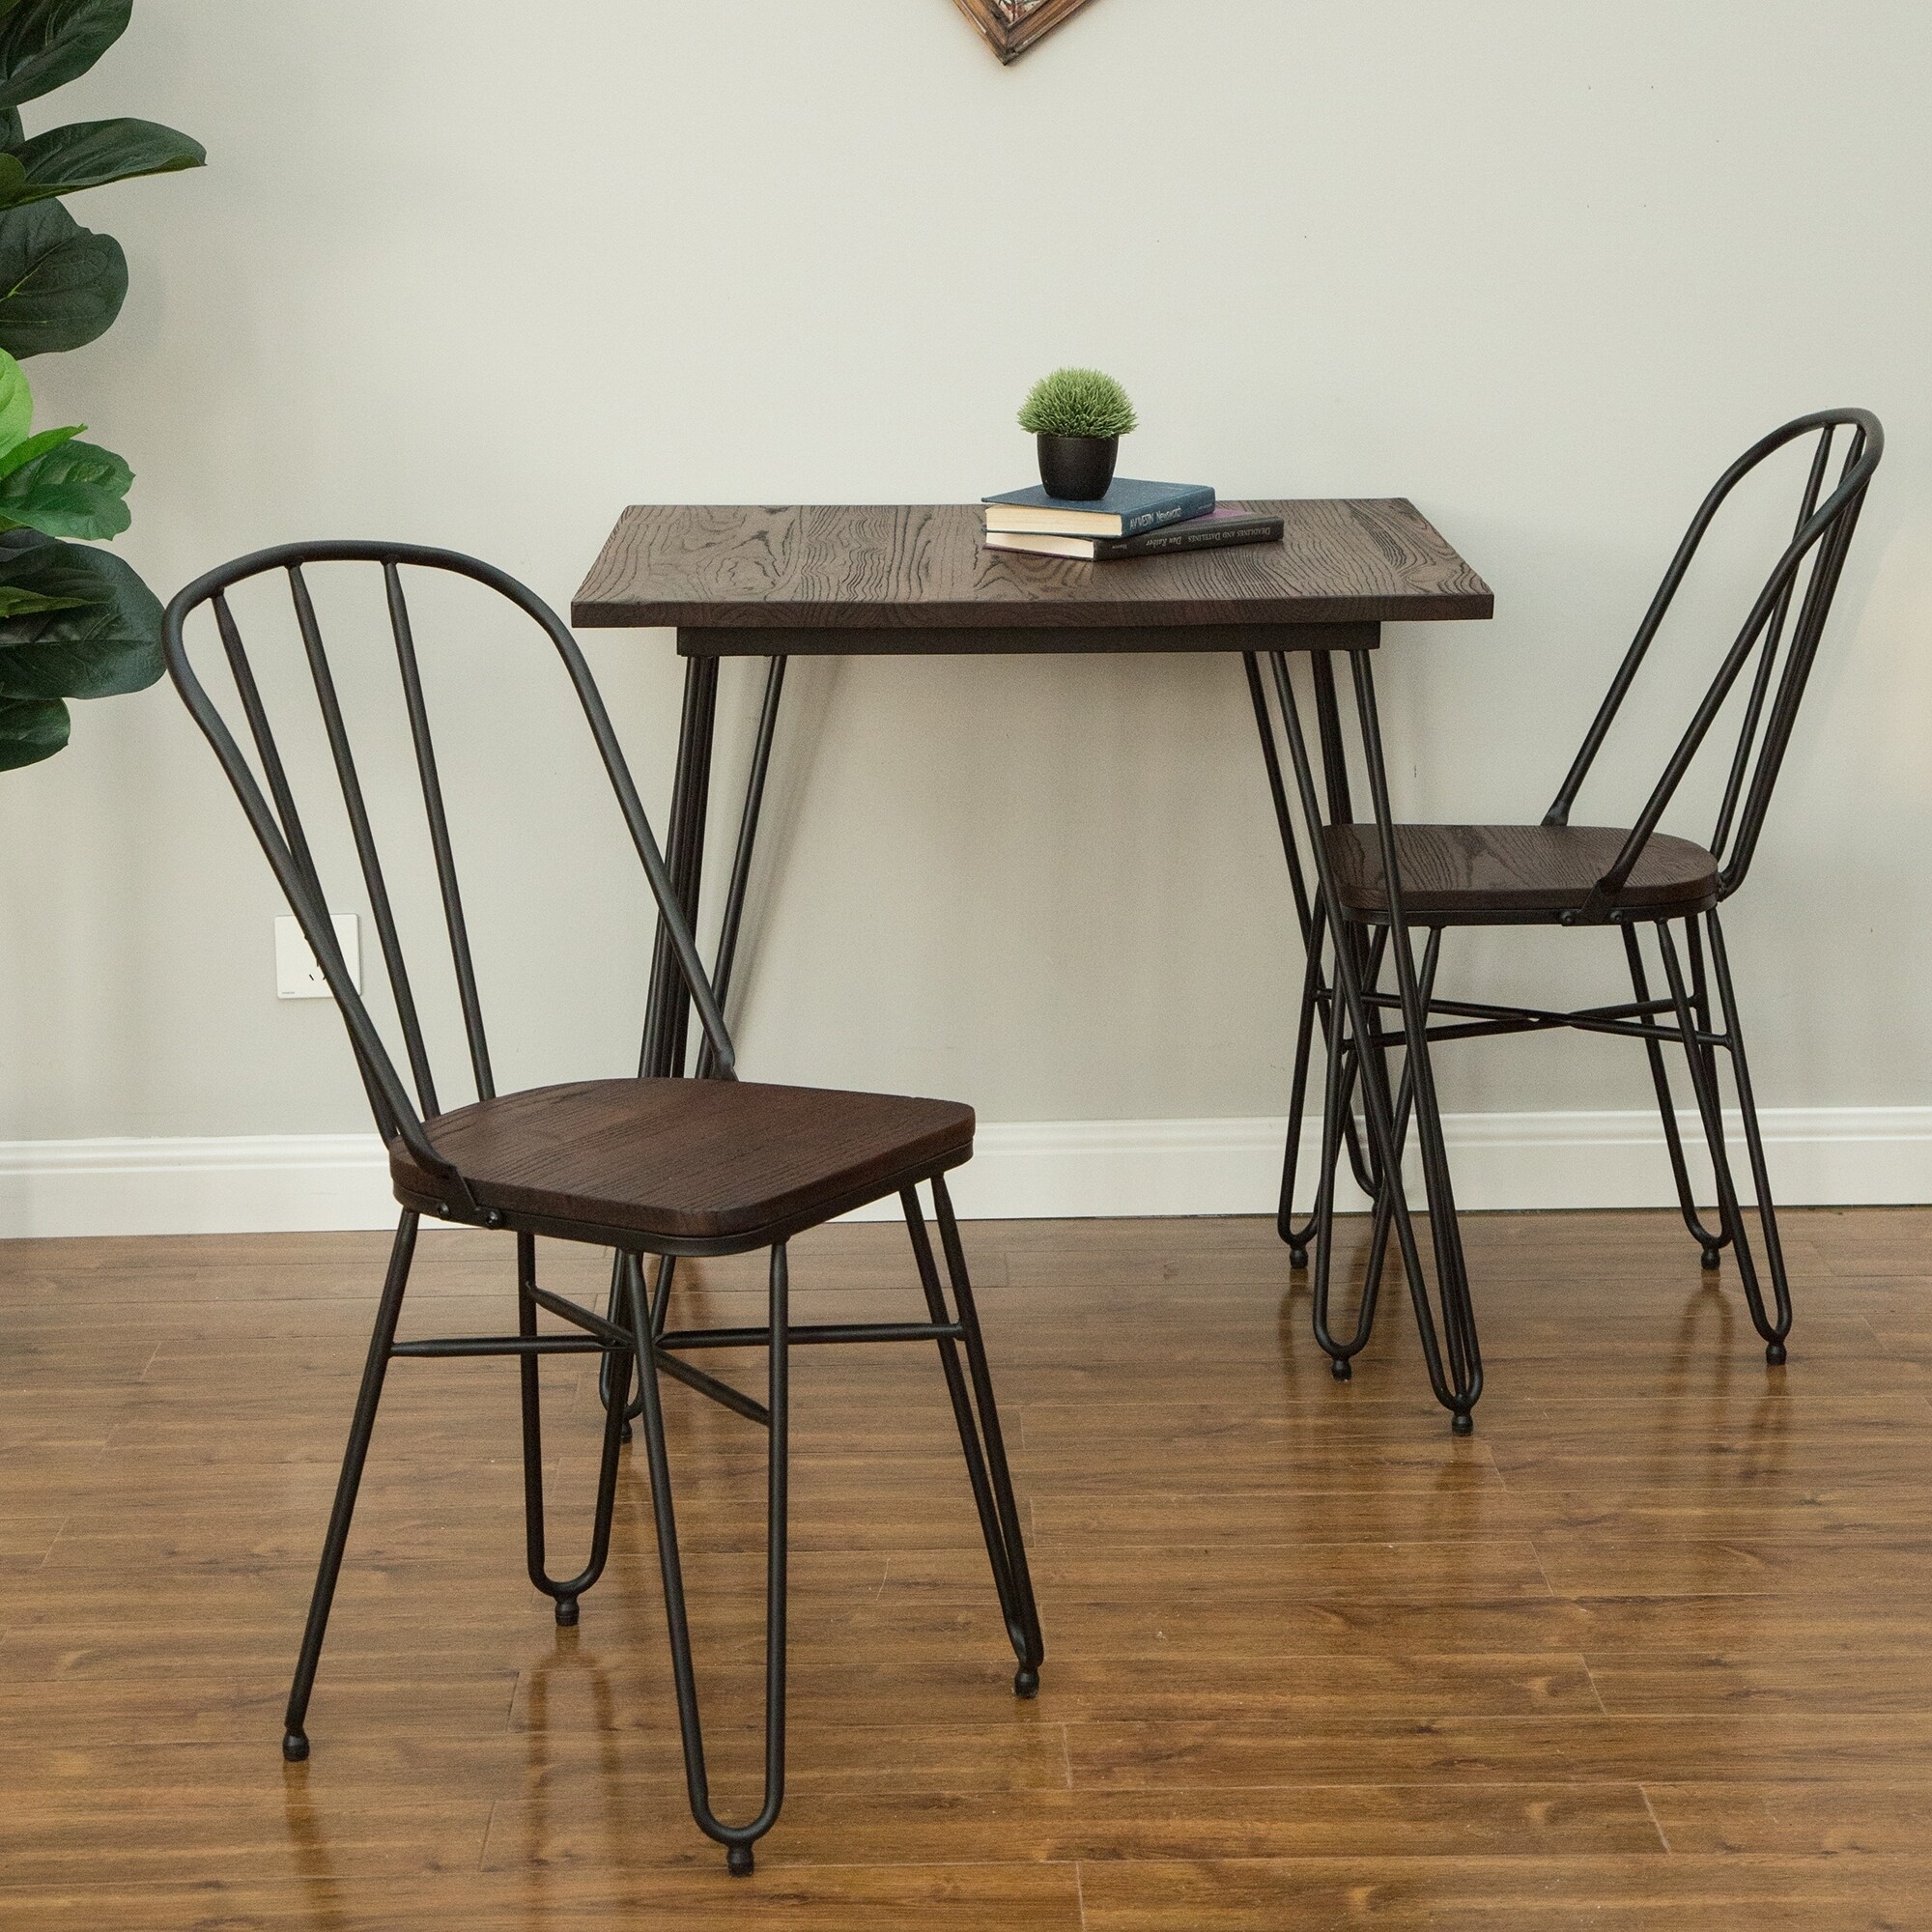 Glitzhome Rustic Wood Seat Metal Dining Chairs Vintage Industrial Home Set of 2